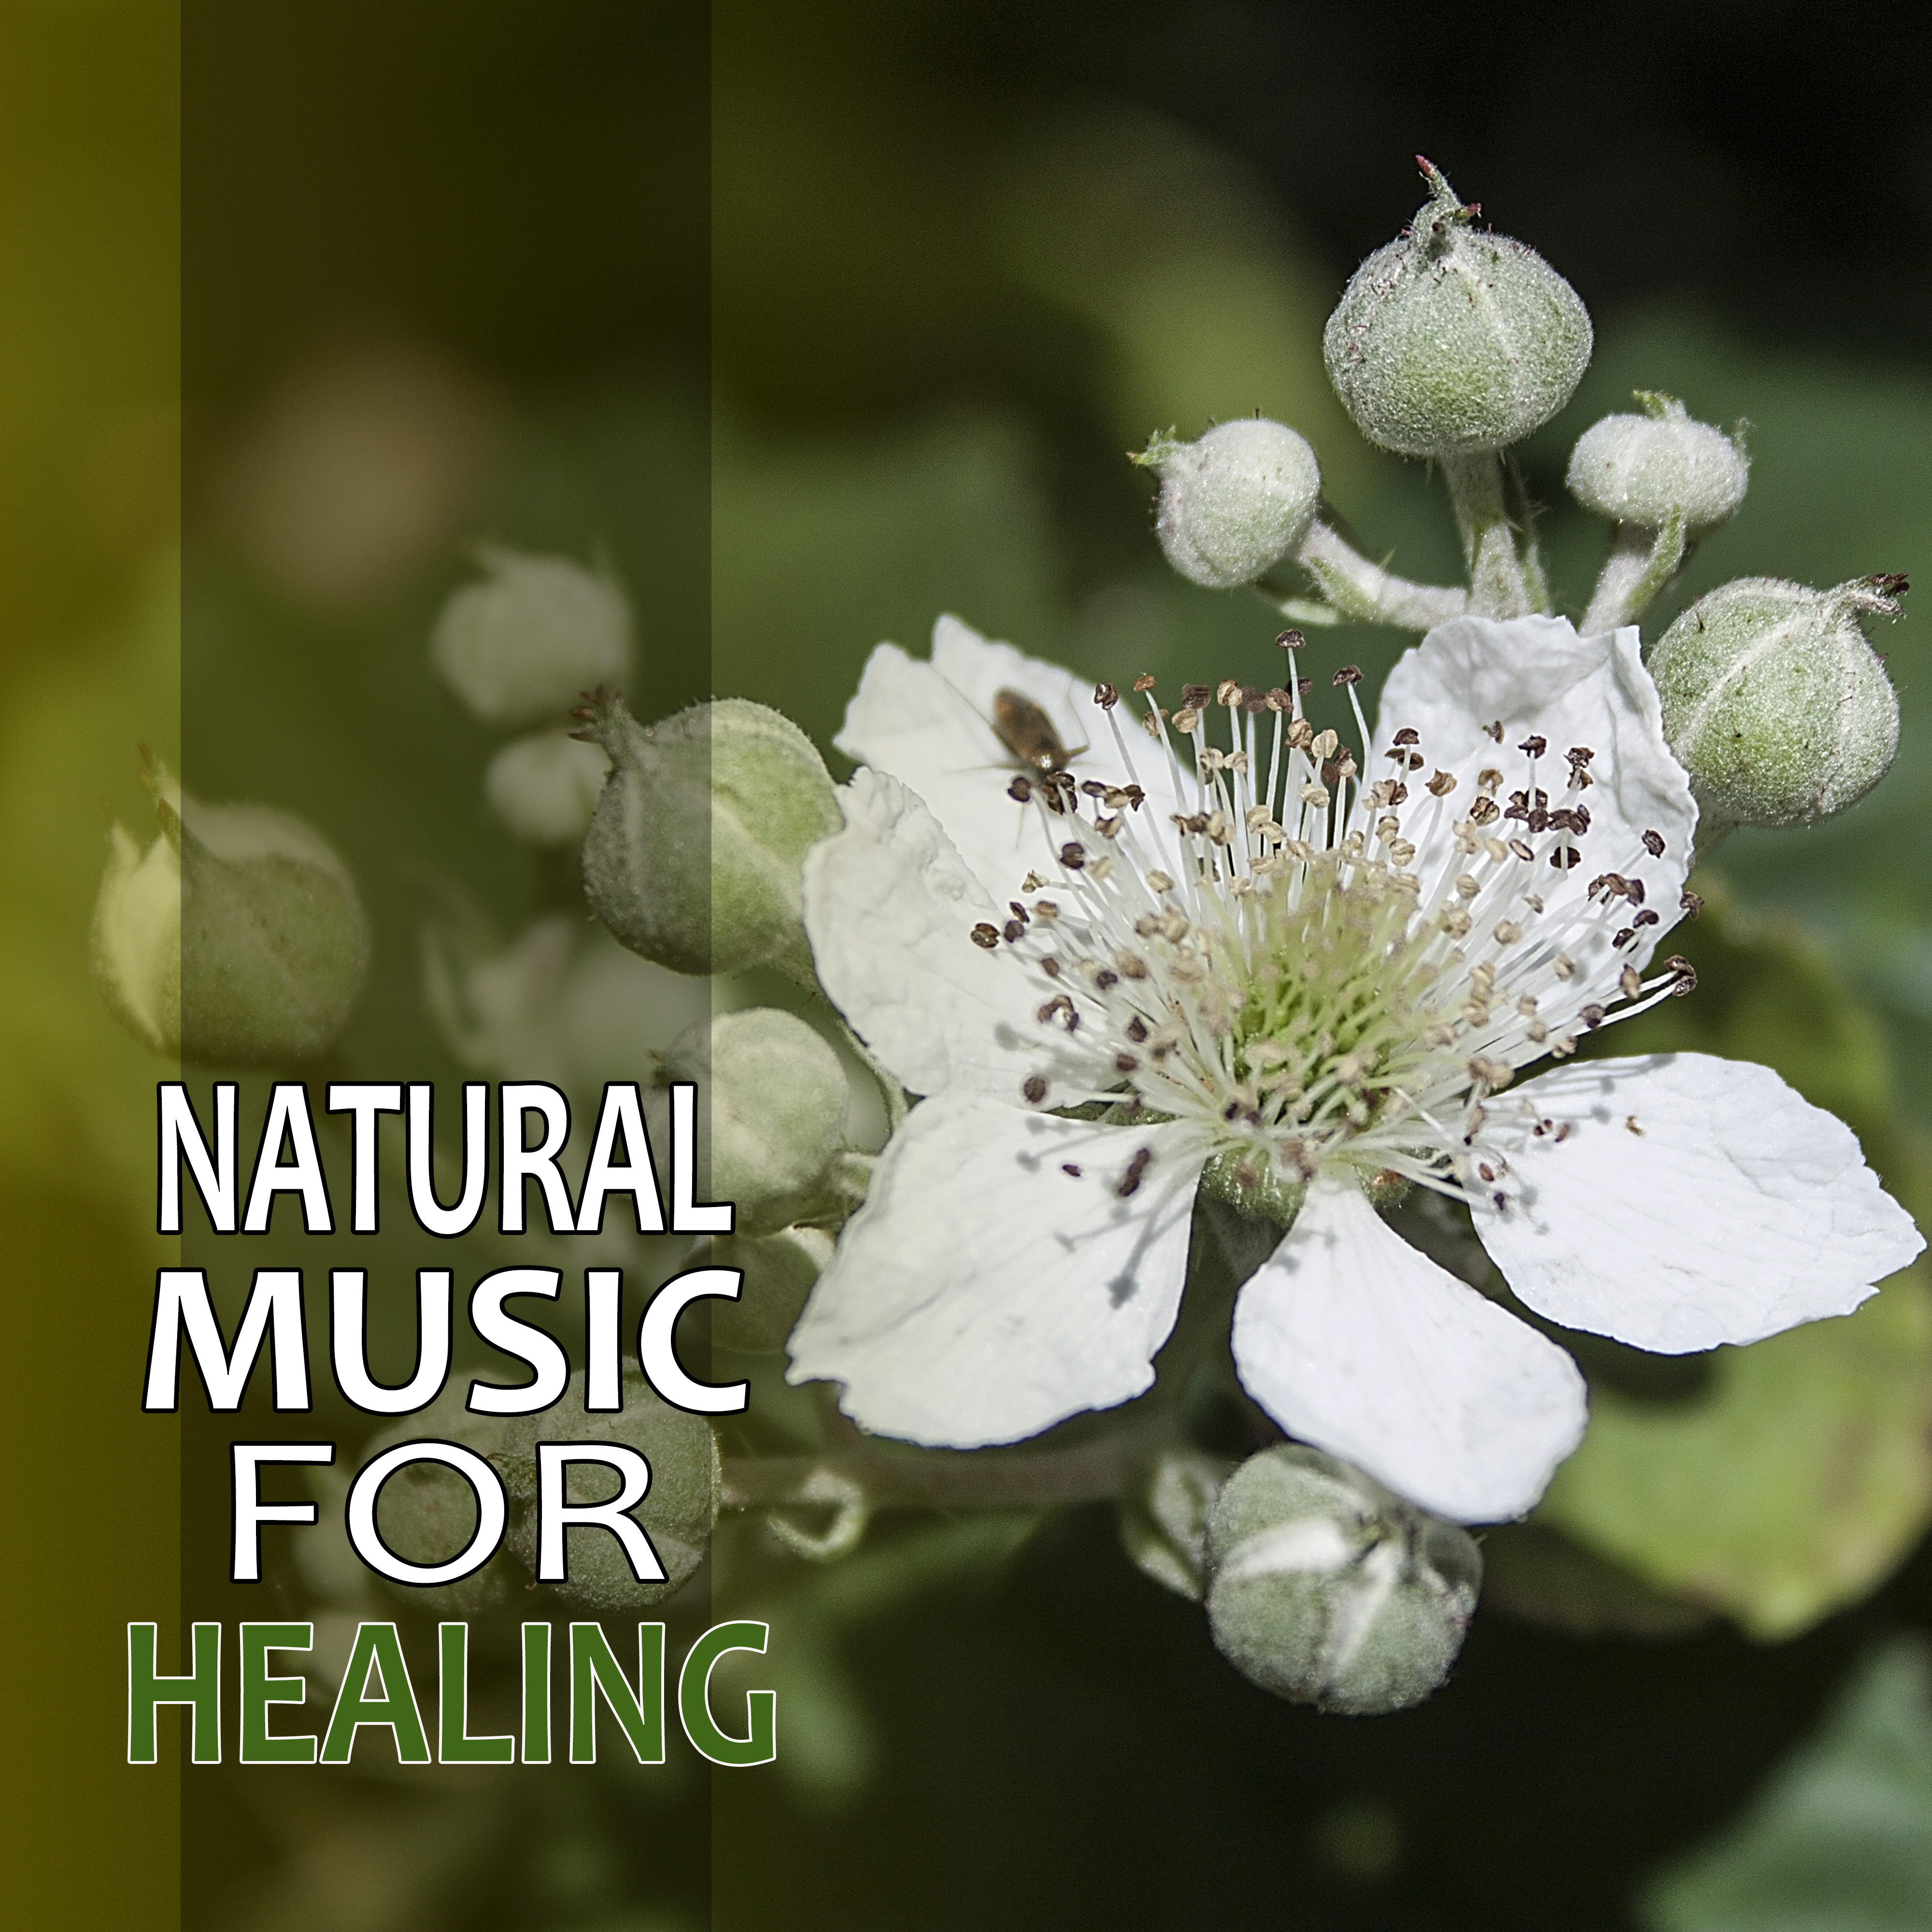 Natural Music for Healing – New Age Calmness, Music to Help You Relax and Calm Your Mind, Healing Touch